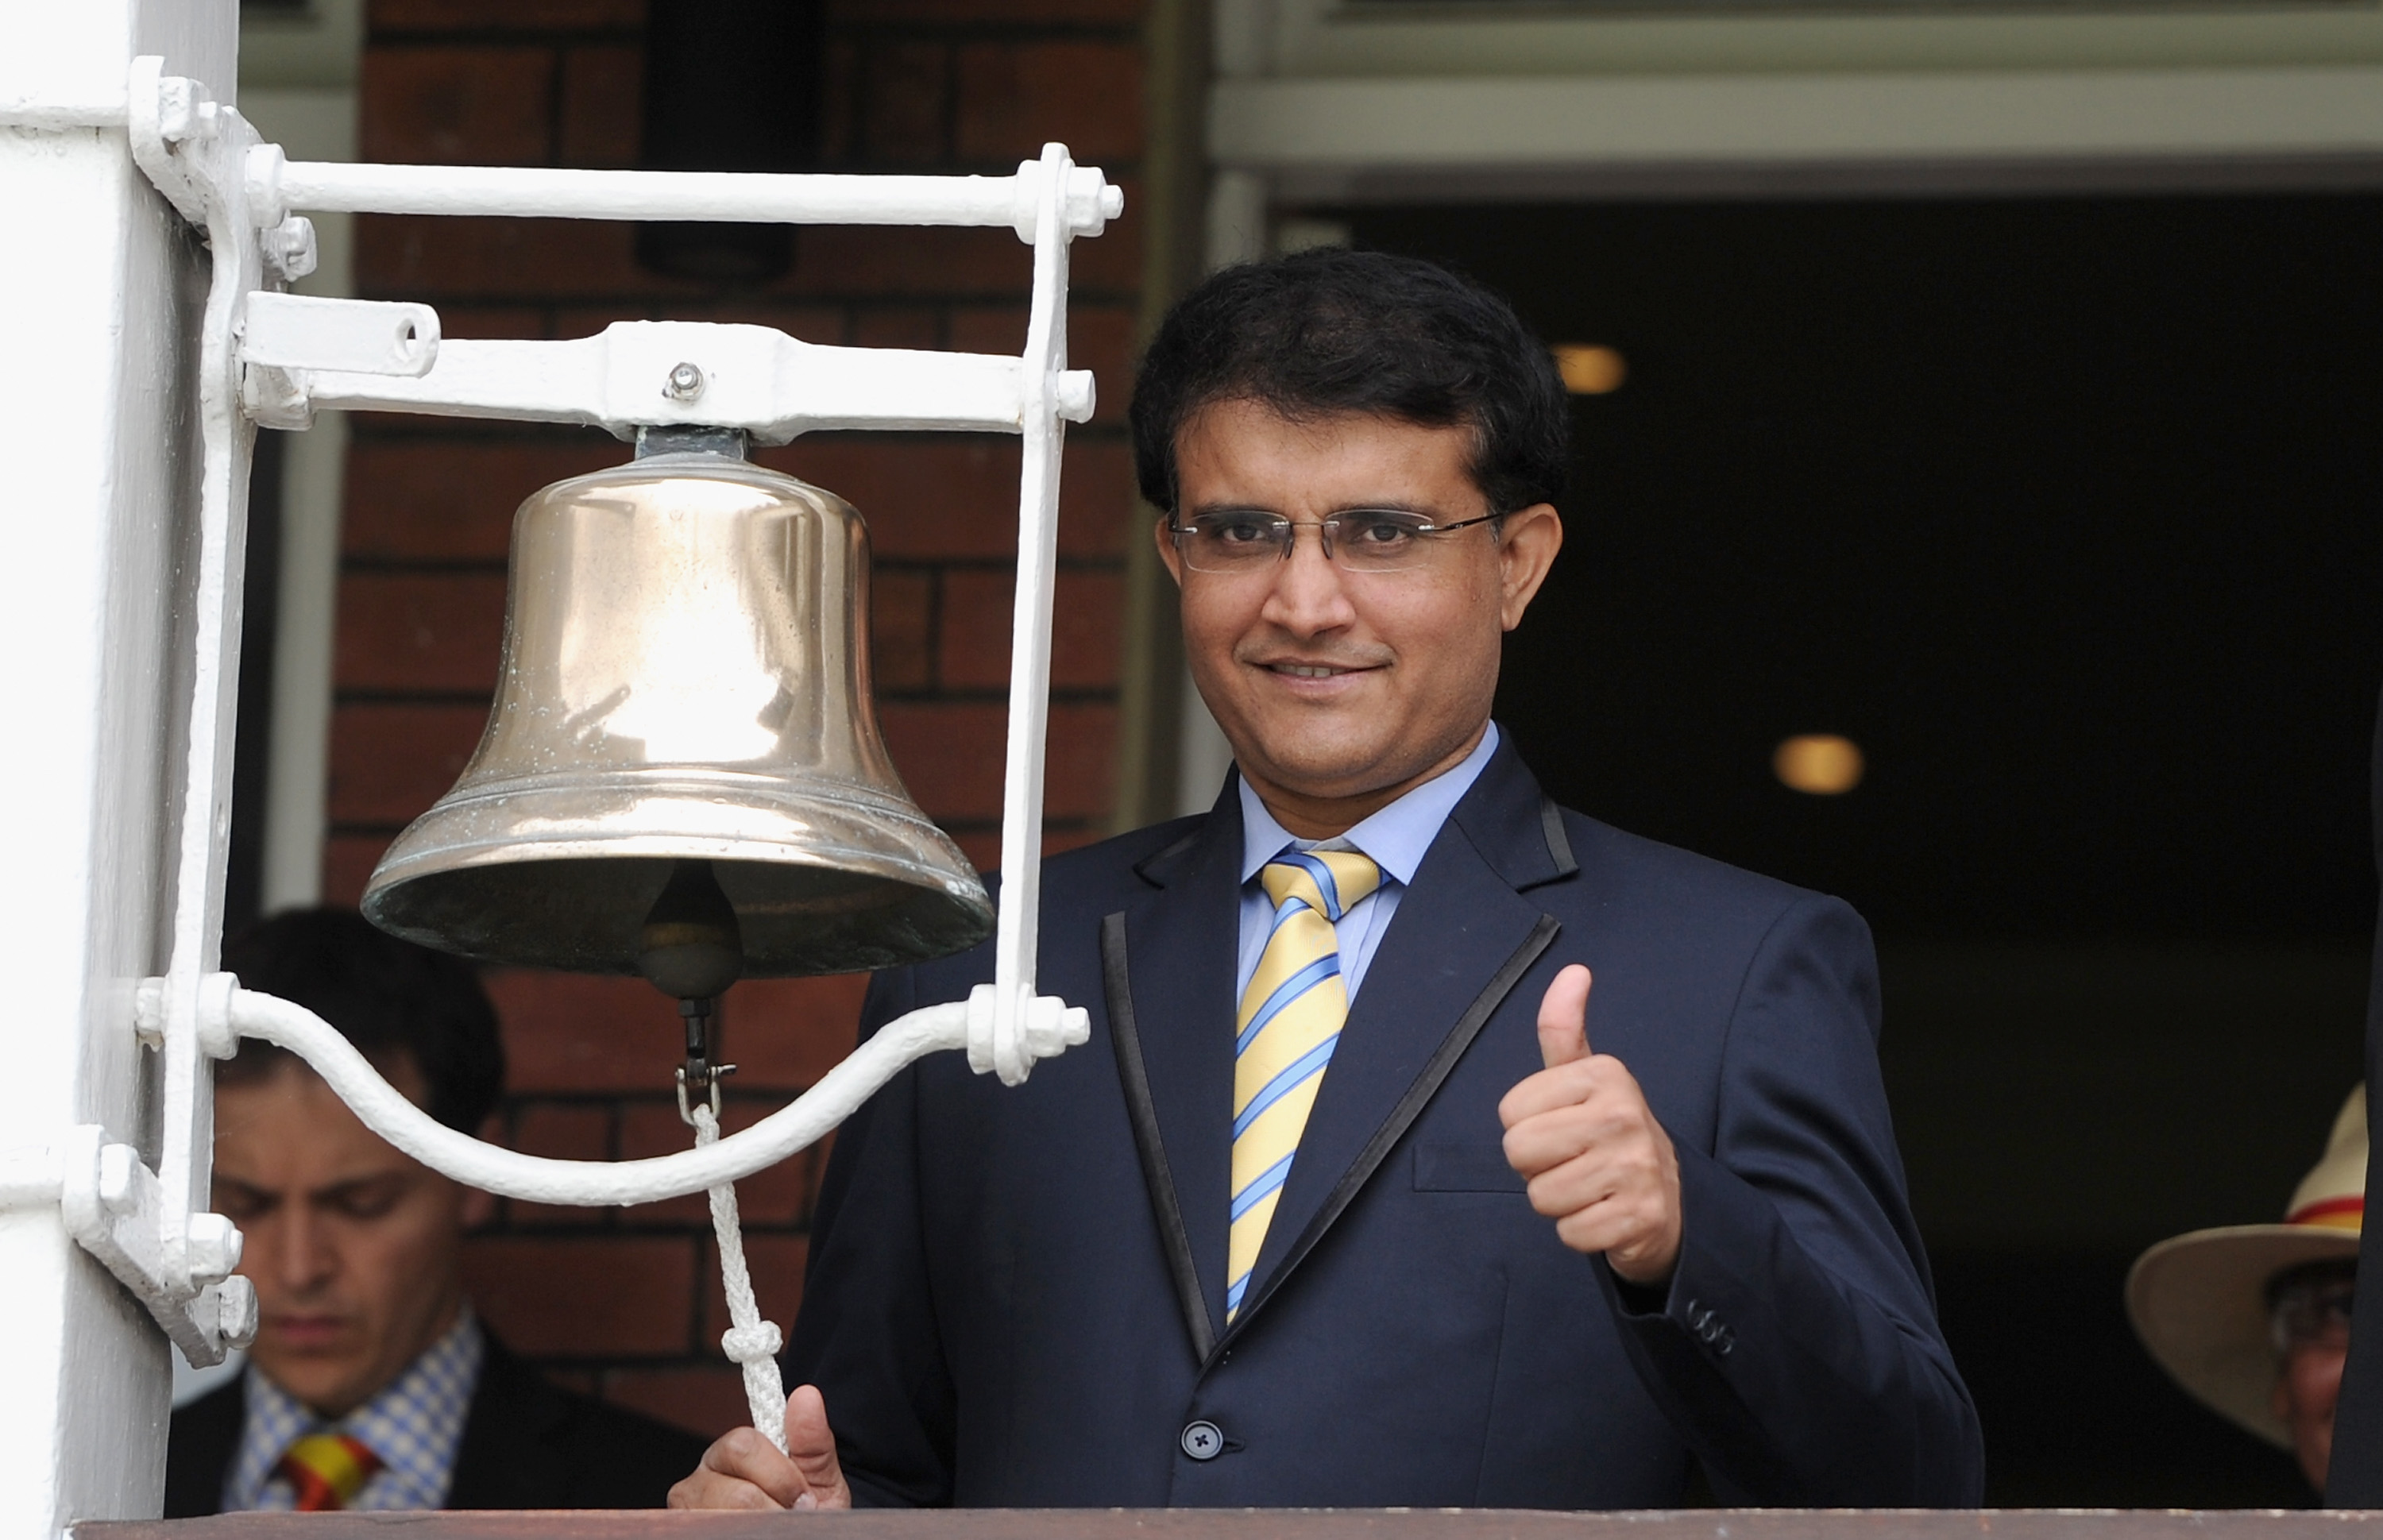 IND vs BAN | Bangladesh PM Sheikh Hasina to ring Eden bell for D/N Test